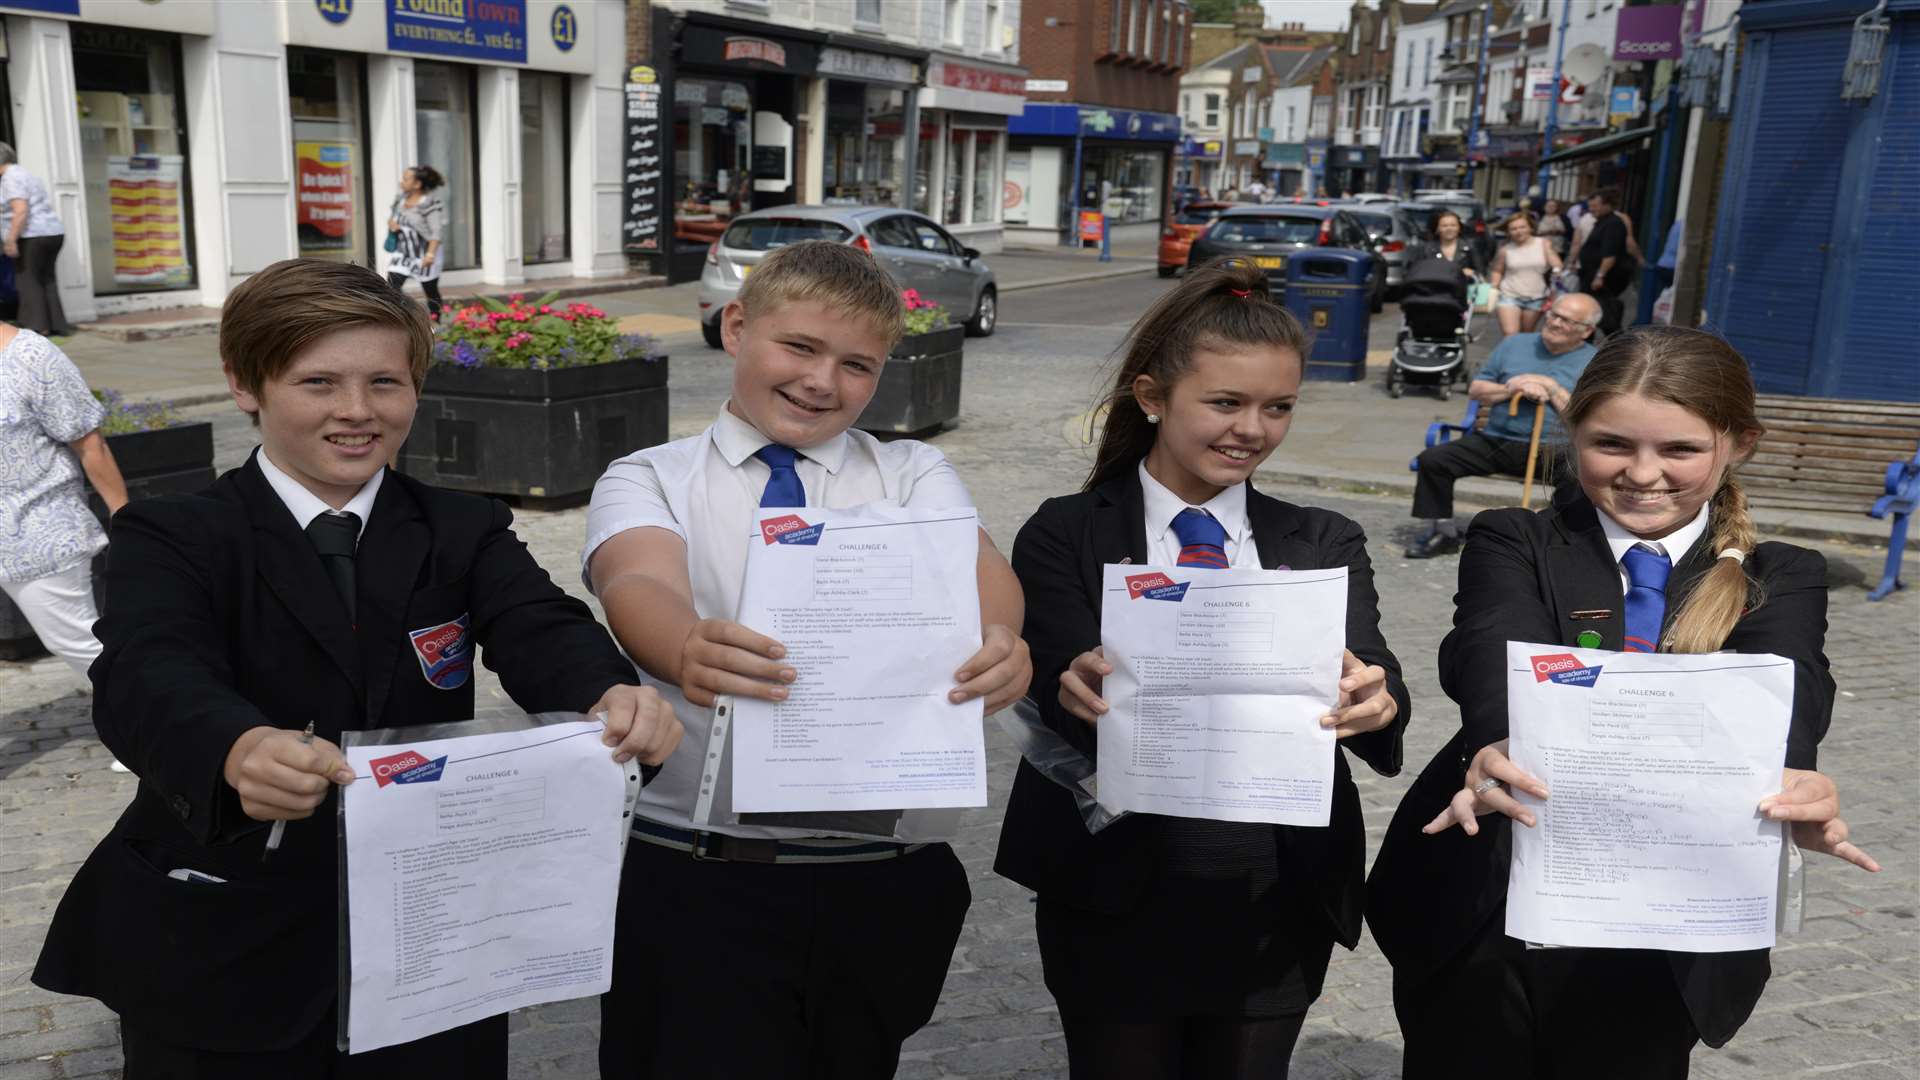 Oasis Isle of Sheppey Academy pupils Jordan Skinner, 15, Dane Blackstock, 12, Belle Peck, 12 and Paige Ashby-Clark, 12 on 'The Apprentice' challenge in Sheerness High Street